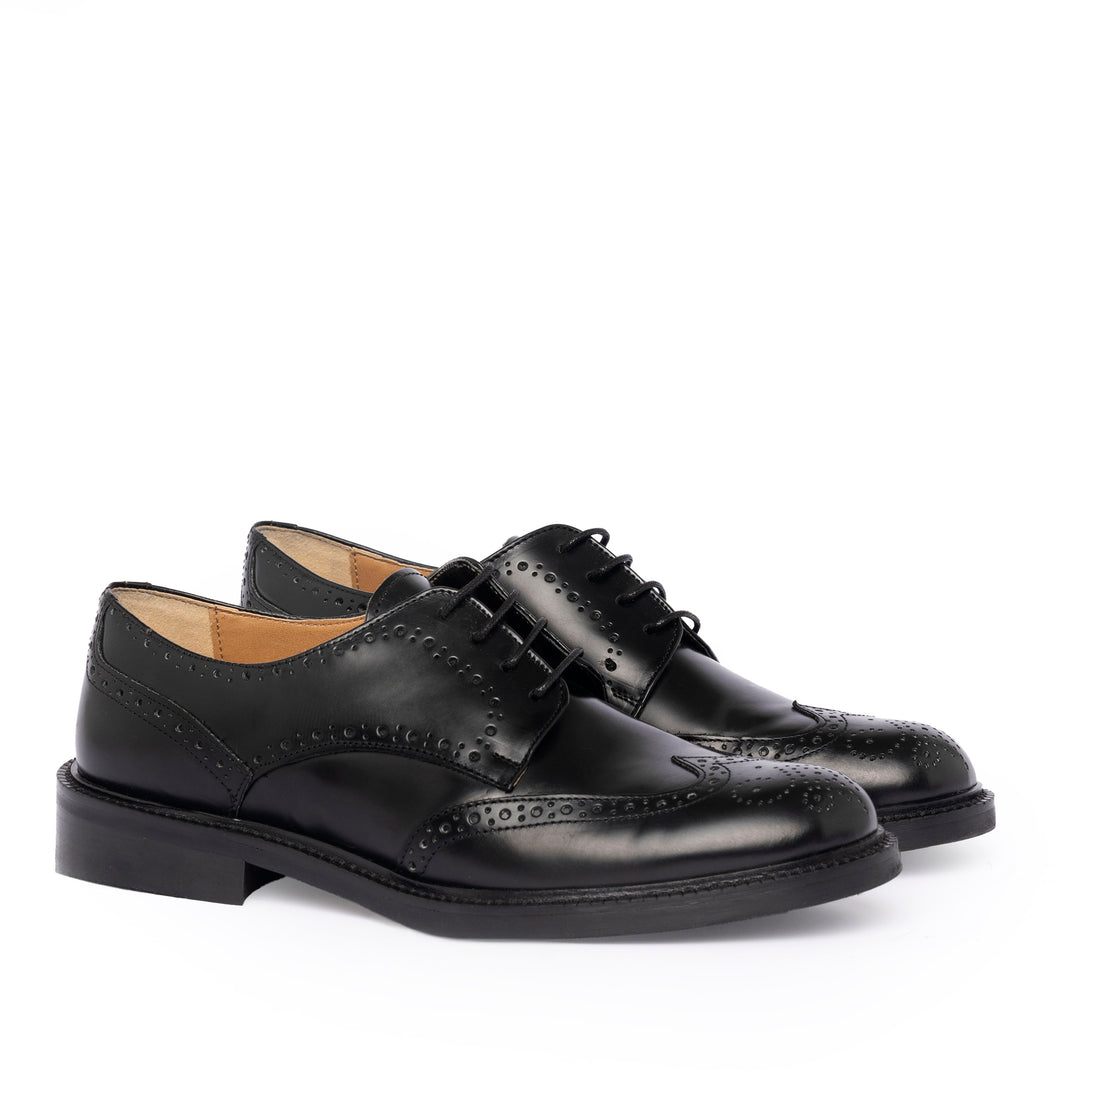 Oxford in abrasive leather